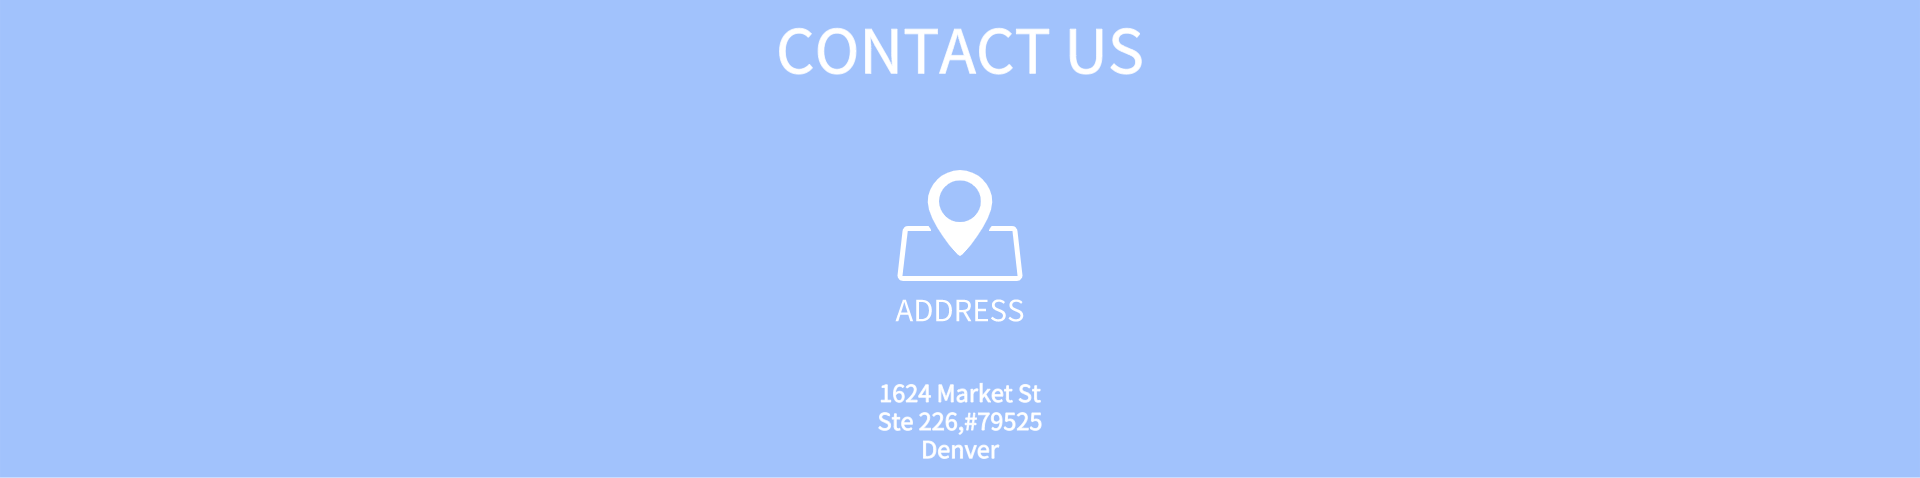 CONTACT US(图1)